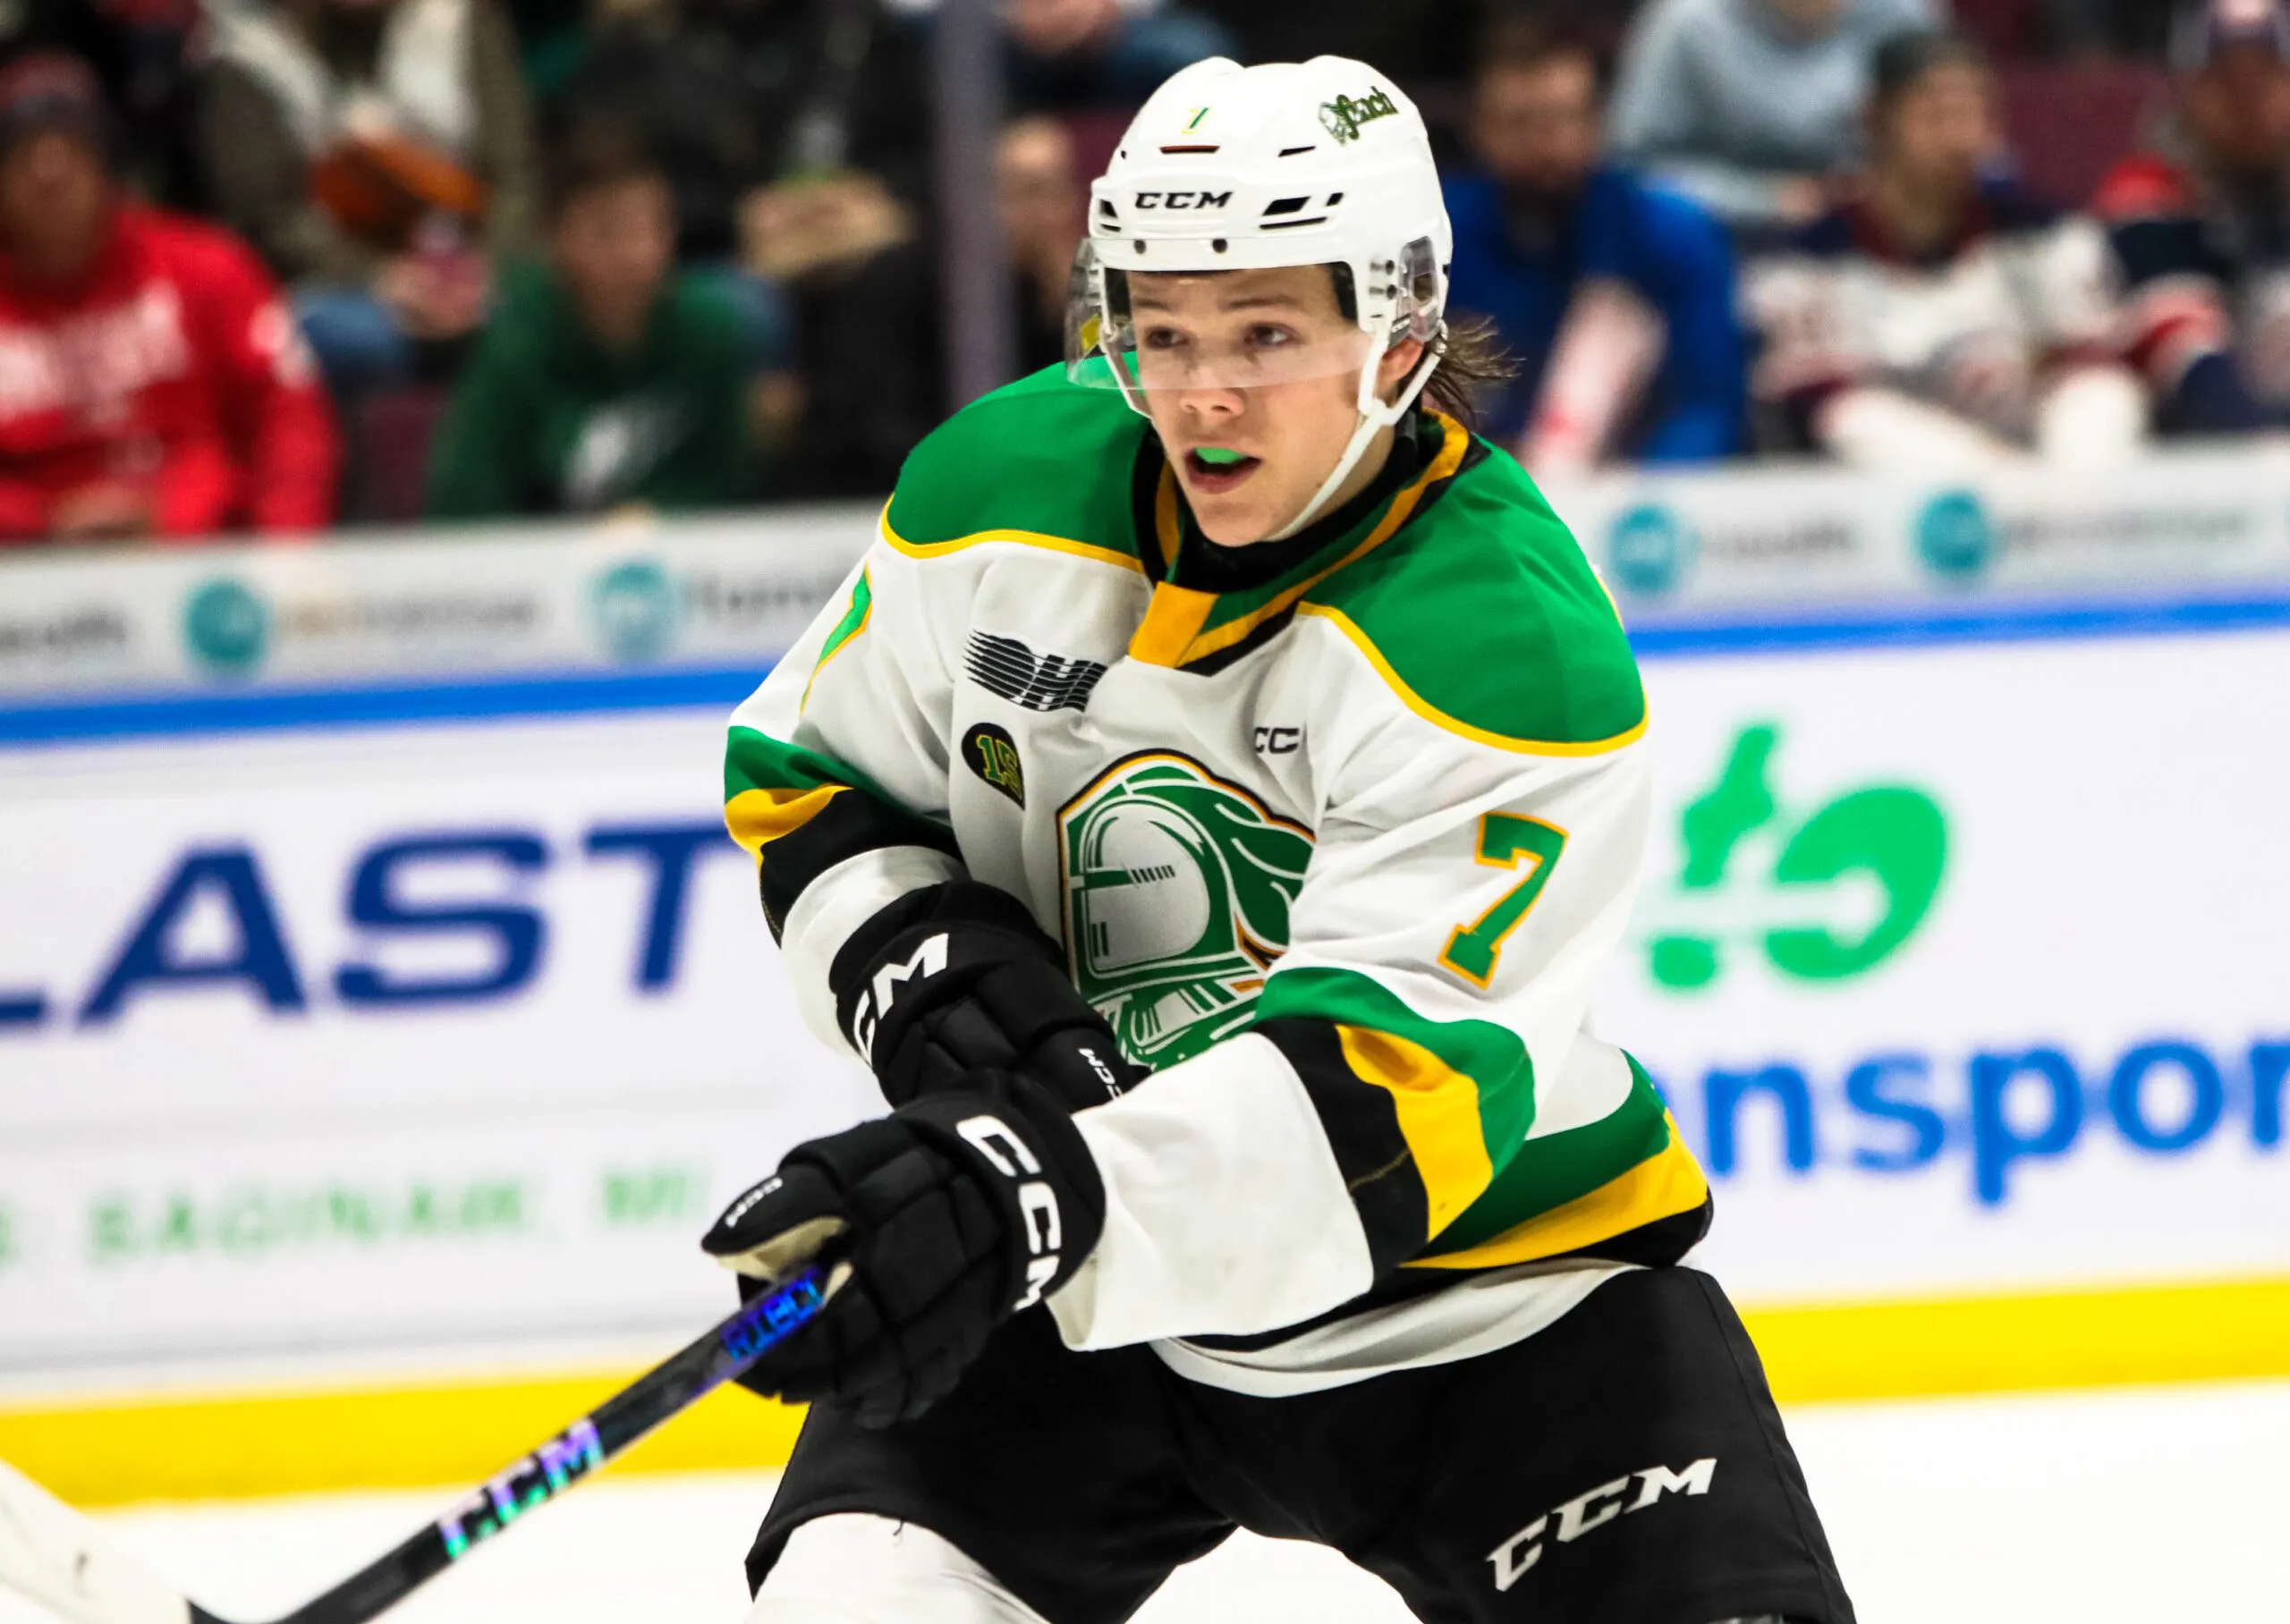 Maple Leafs prospect Easton Cowan breaks London Knights record with points in 34 straight games